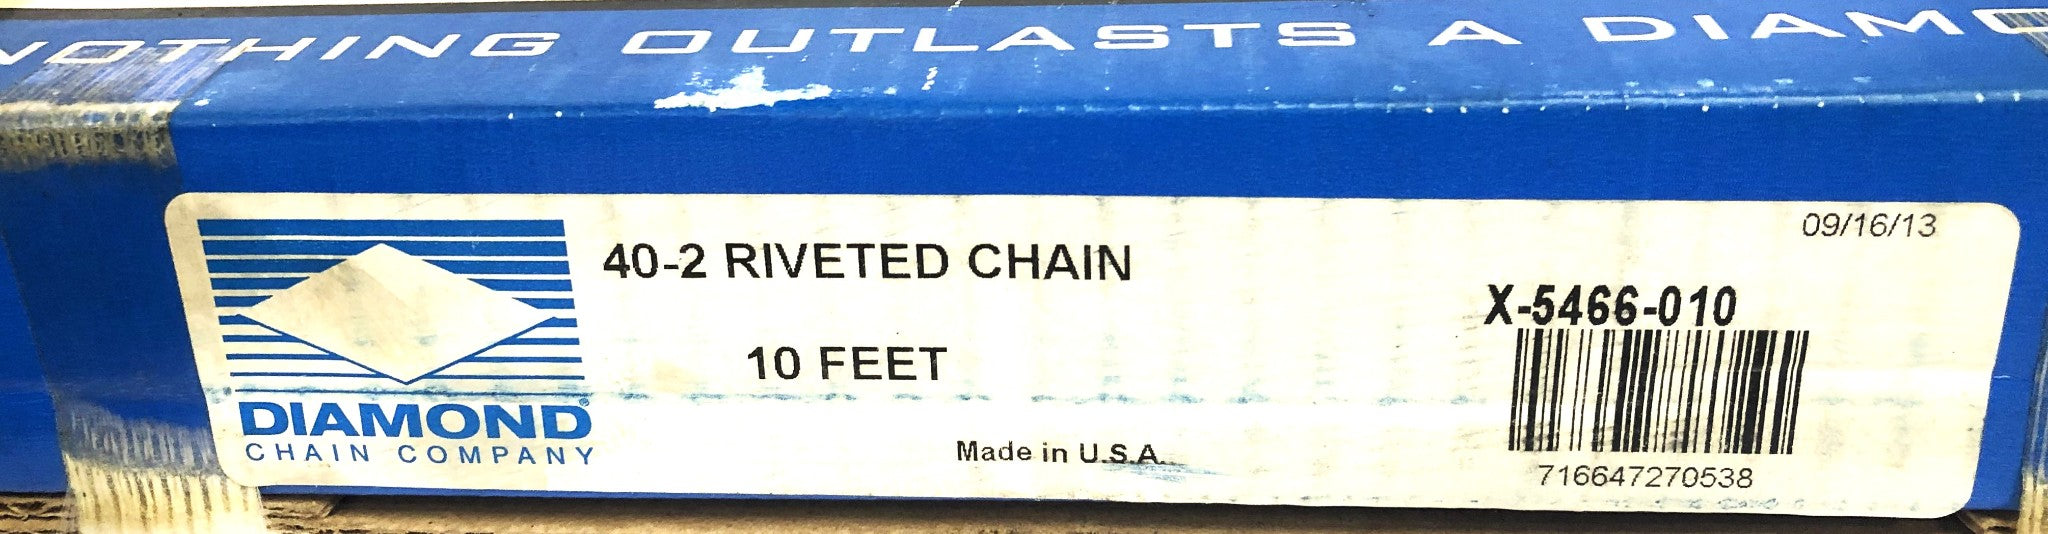 Diamond Chain 10 Foot 40-2 Riveted Double Strand Roller Chain X-5466-010 NOS